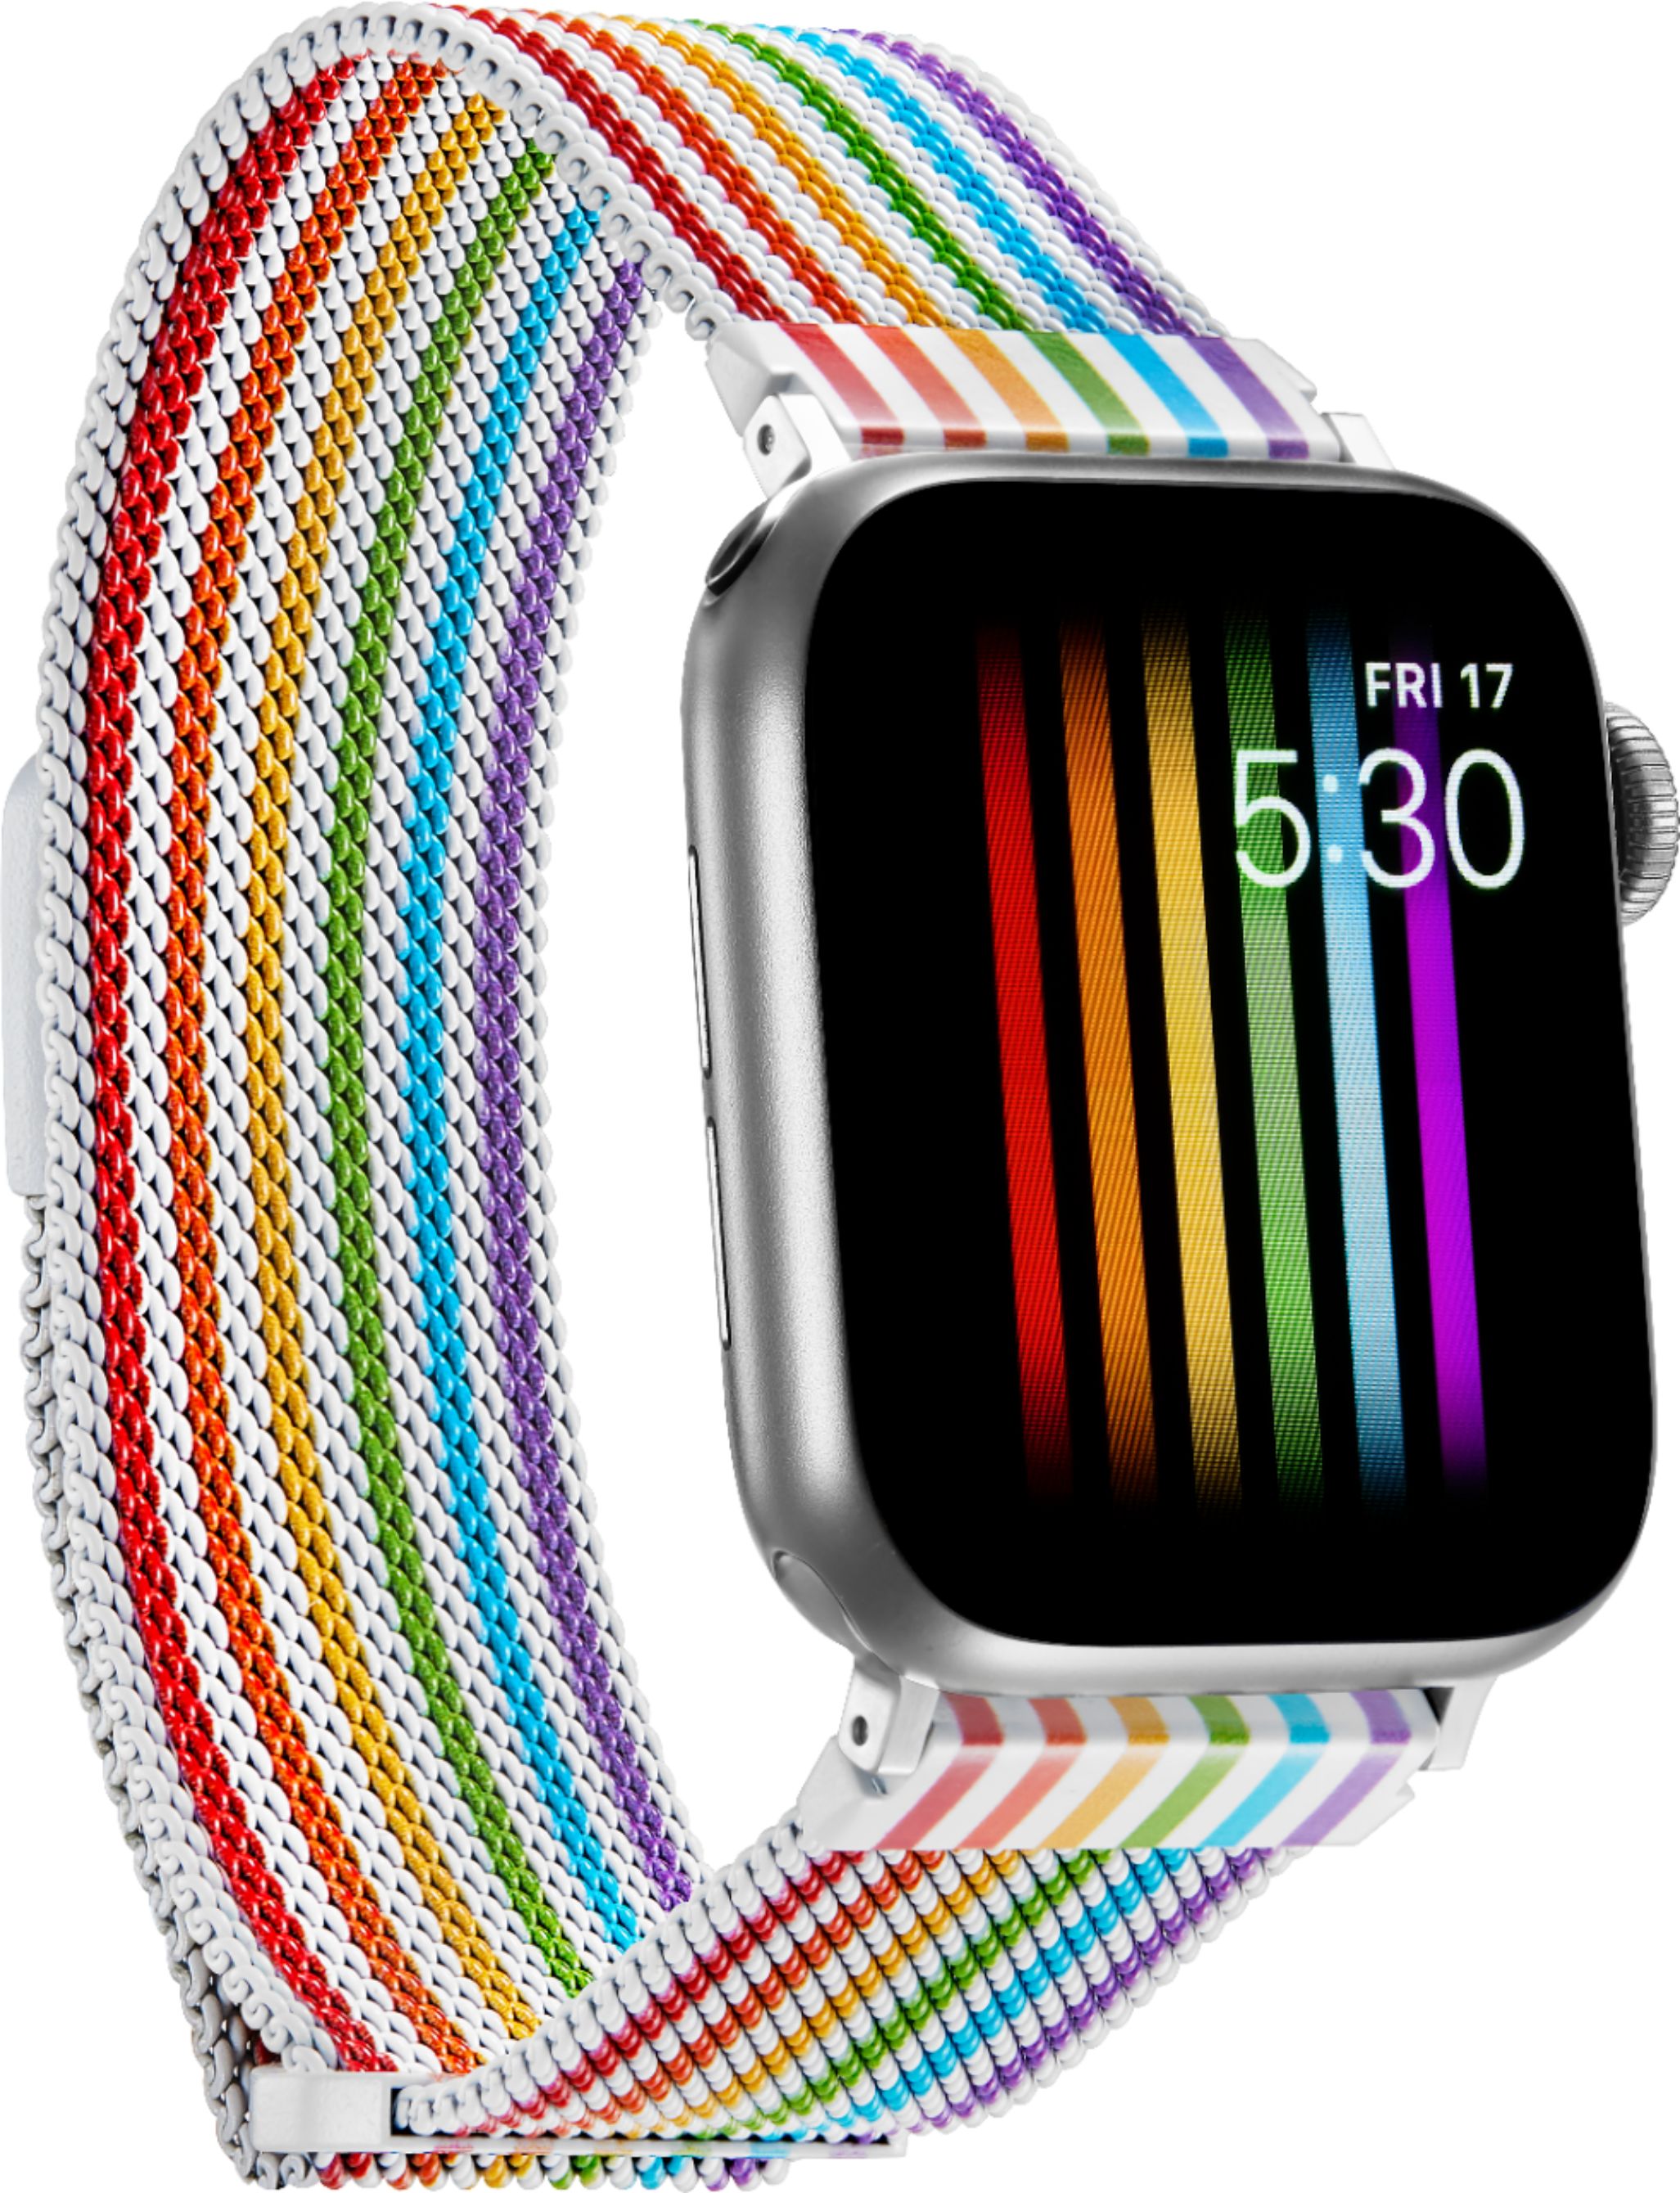 Platinum Magnetic Stainless Steel Mesh Band for Apple Watch